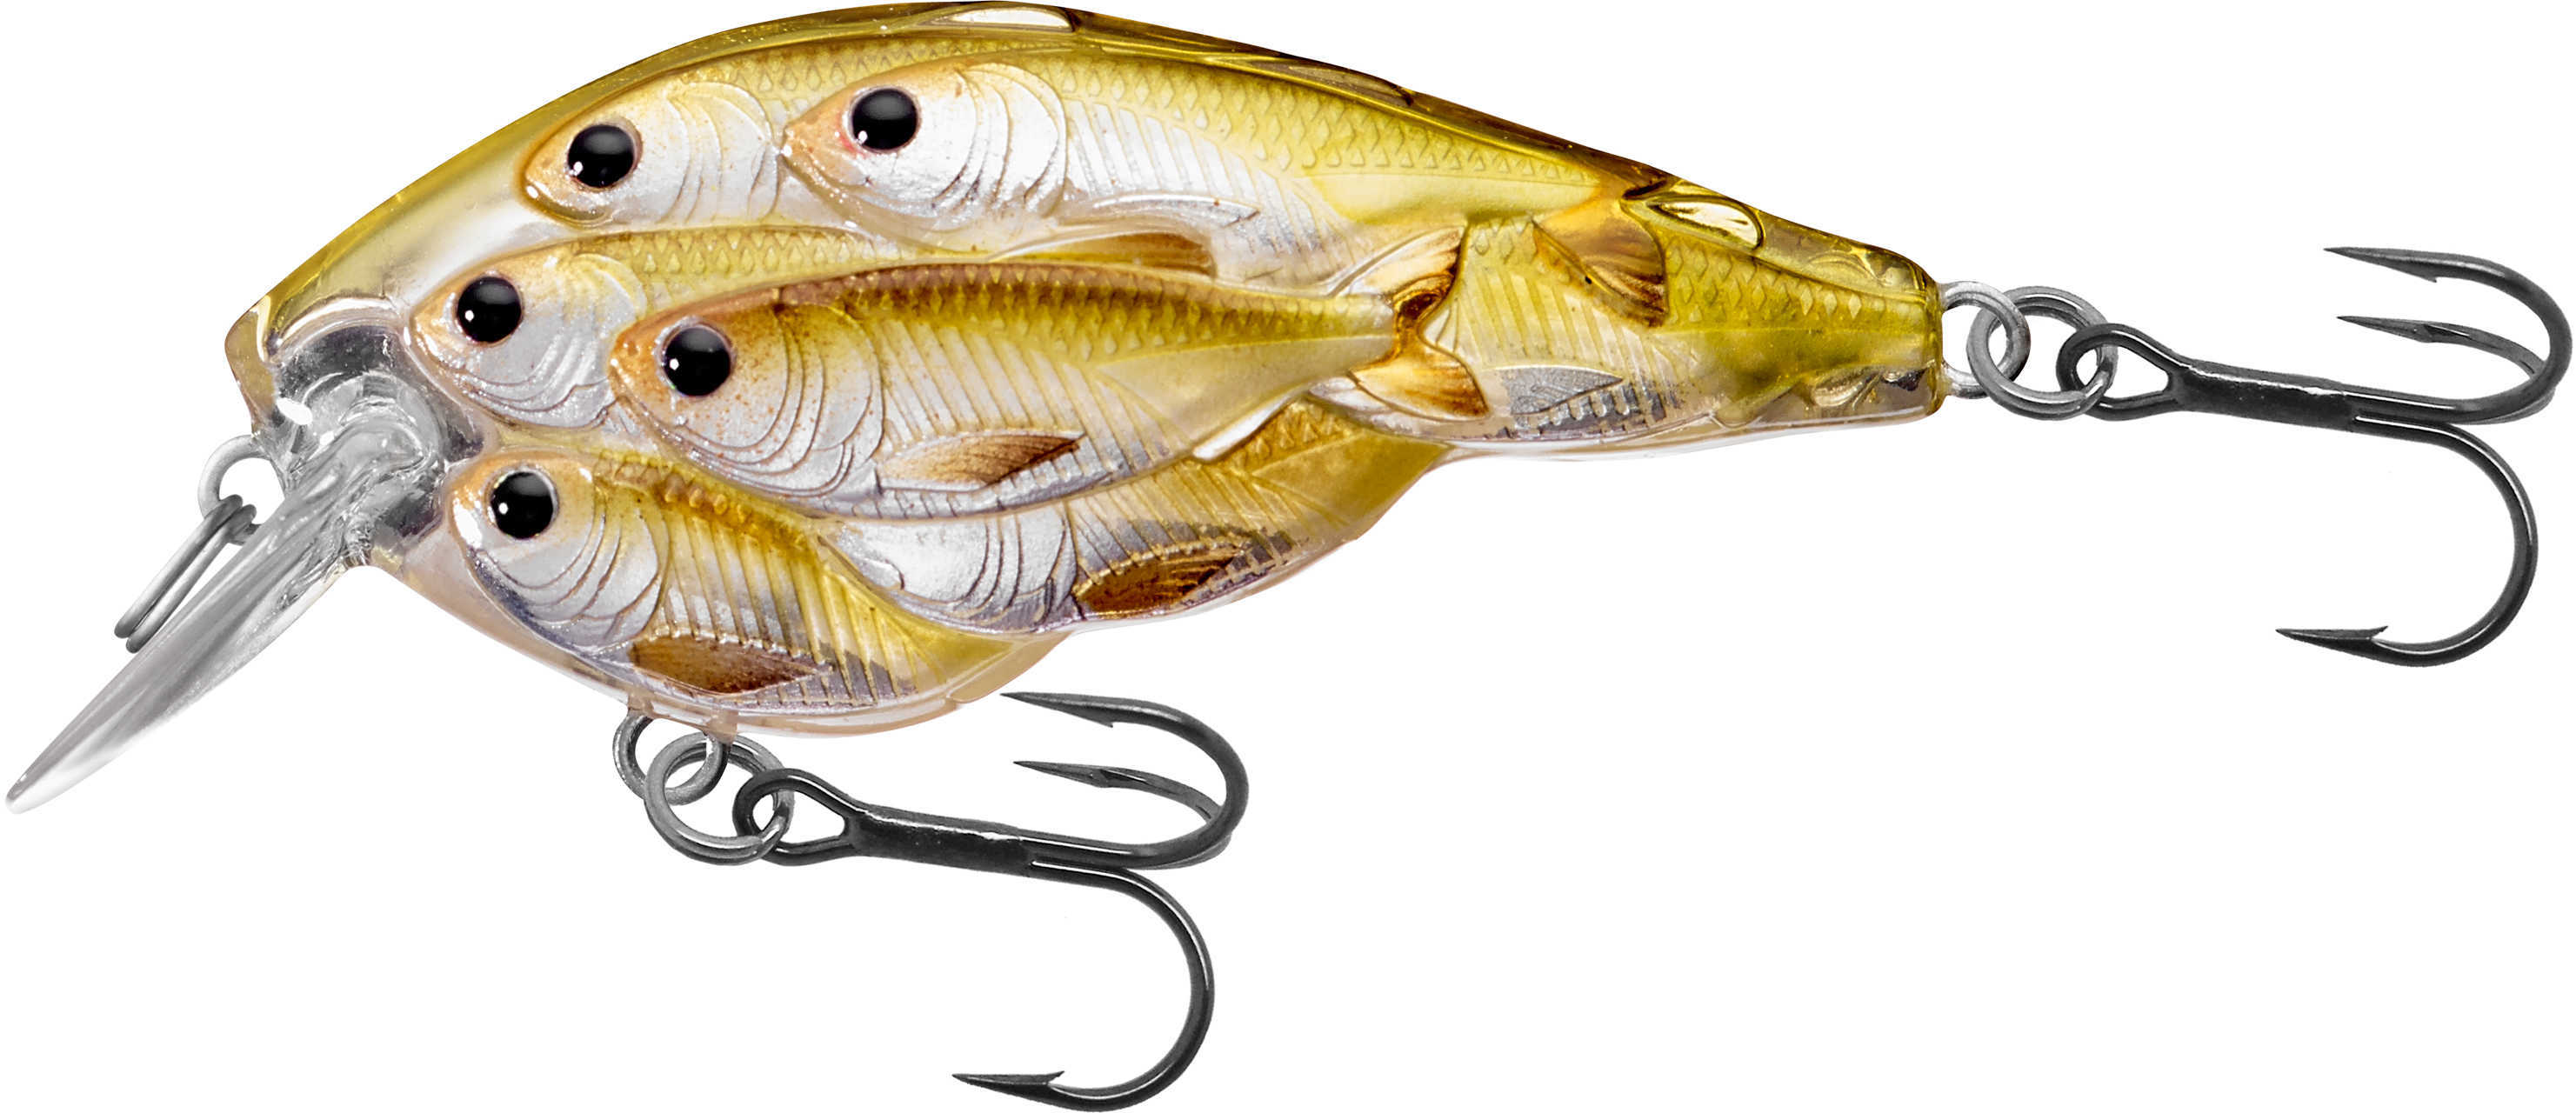 LIVETARGET Lures / Koppers Fishing and Tackle Corp Yearling Baitball Squarebill Pearl/Olive Shad #4 Md: YSB60S815